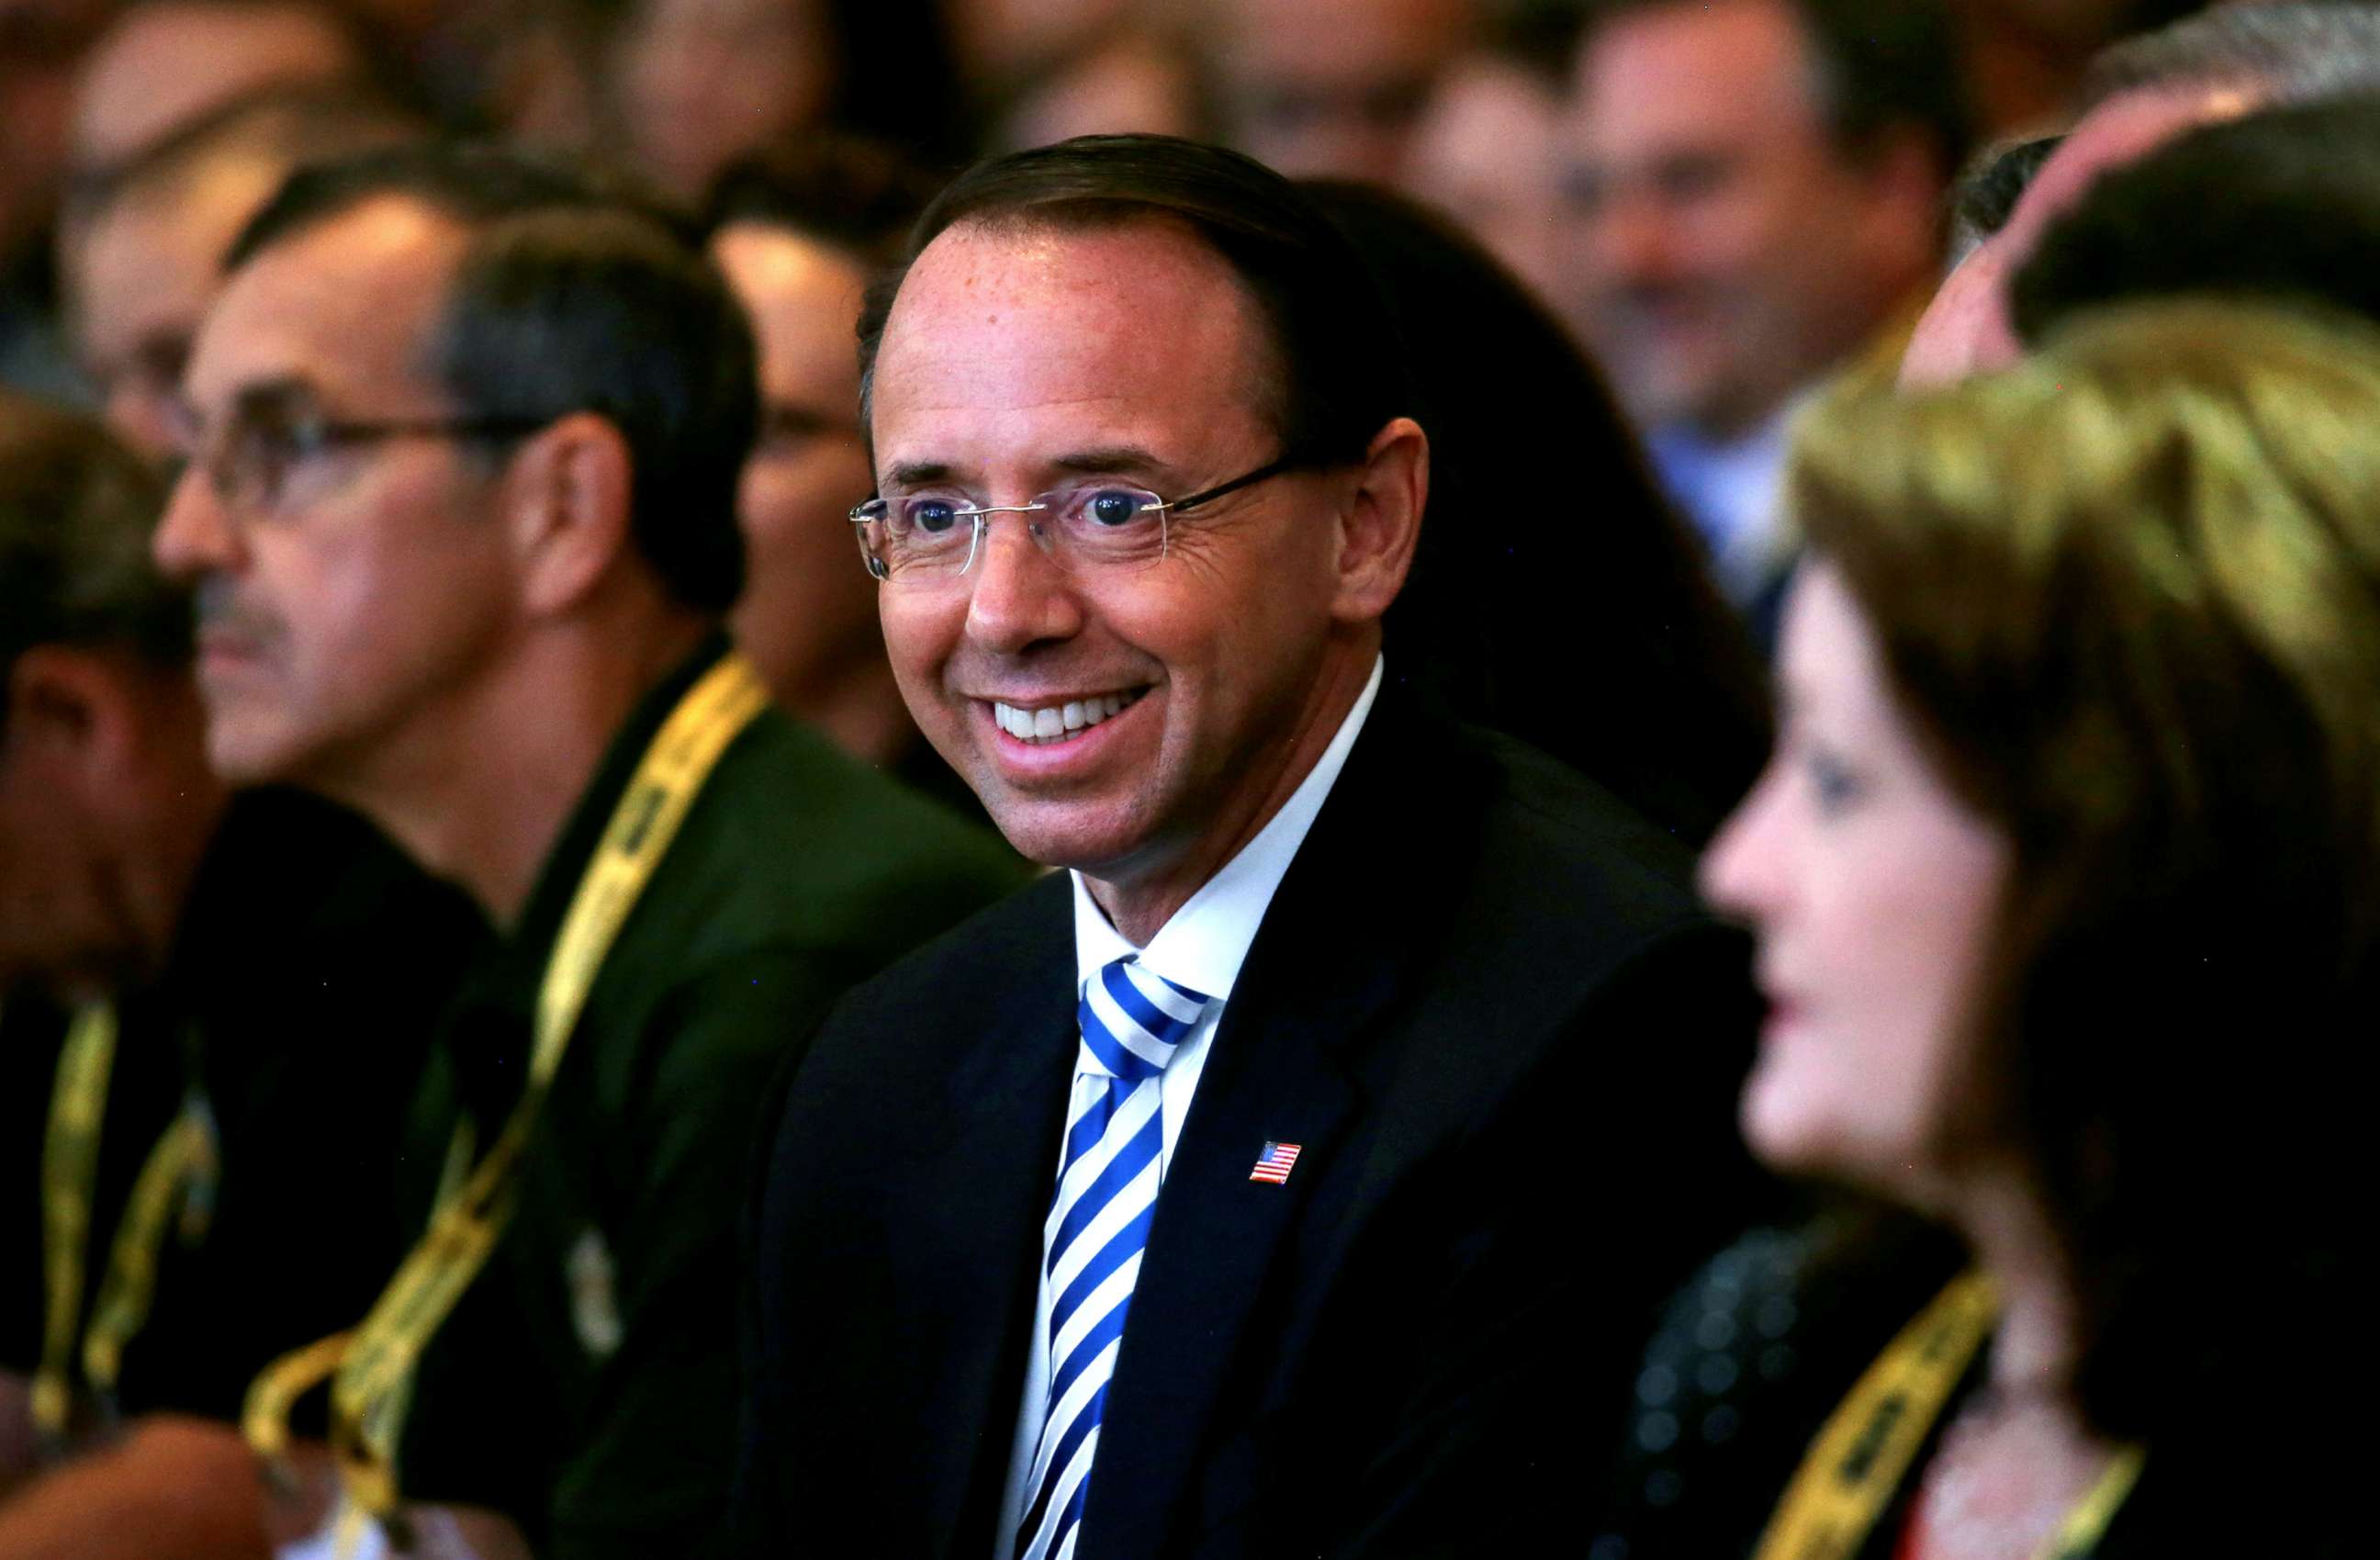 PHOTO: Deputy Attorney General Rod Rosenstein waits in the audience to listen to President Donald Trump speak at the International Association of Chiefs of Police Annual Convention in Orlando, Fla., Oct. 8, 2018.